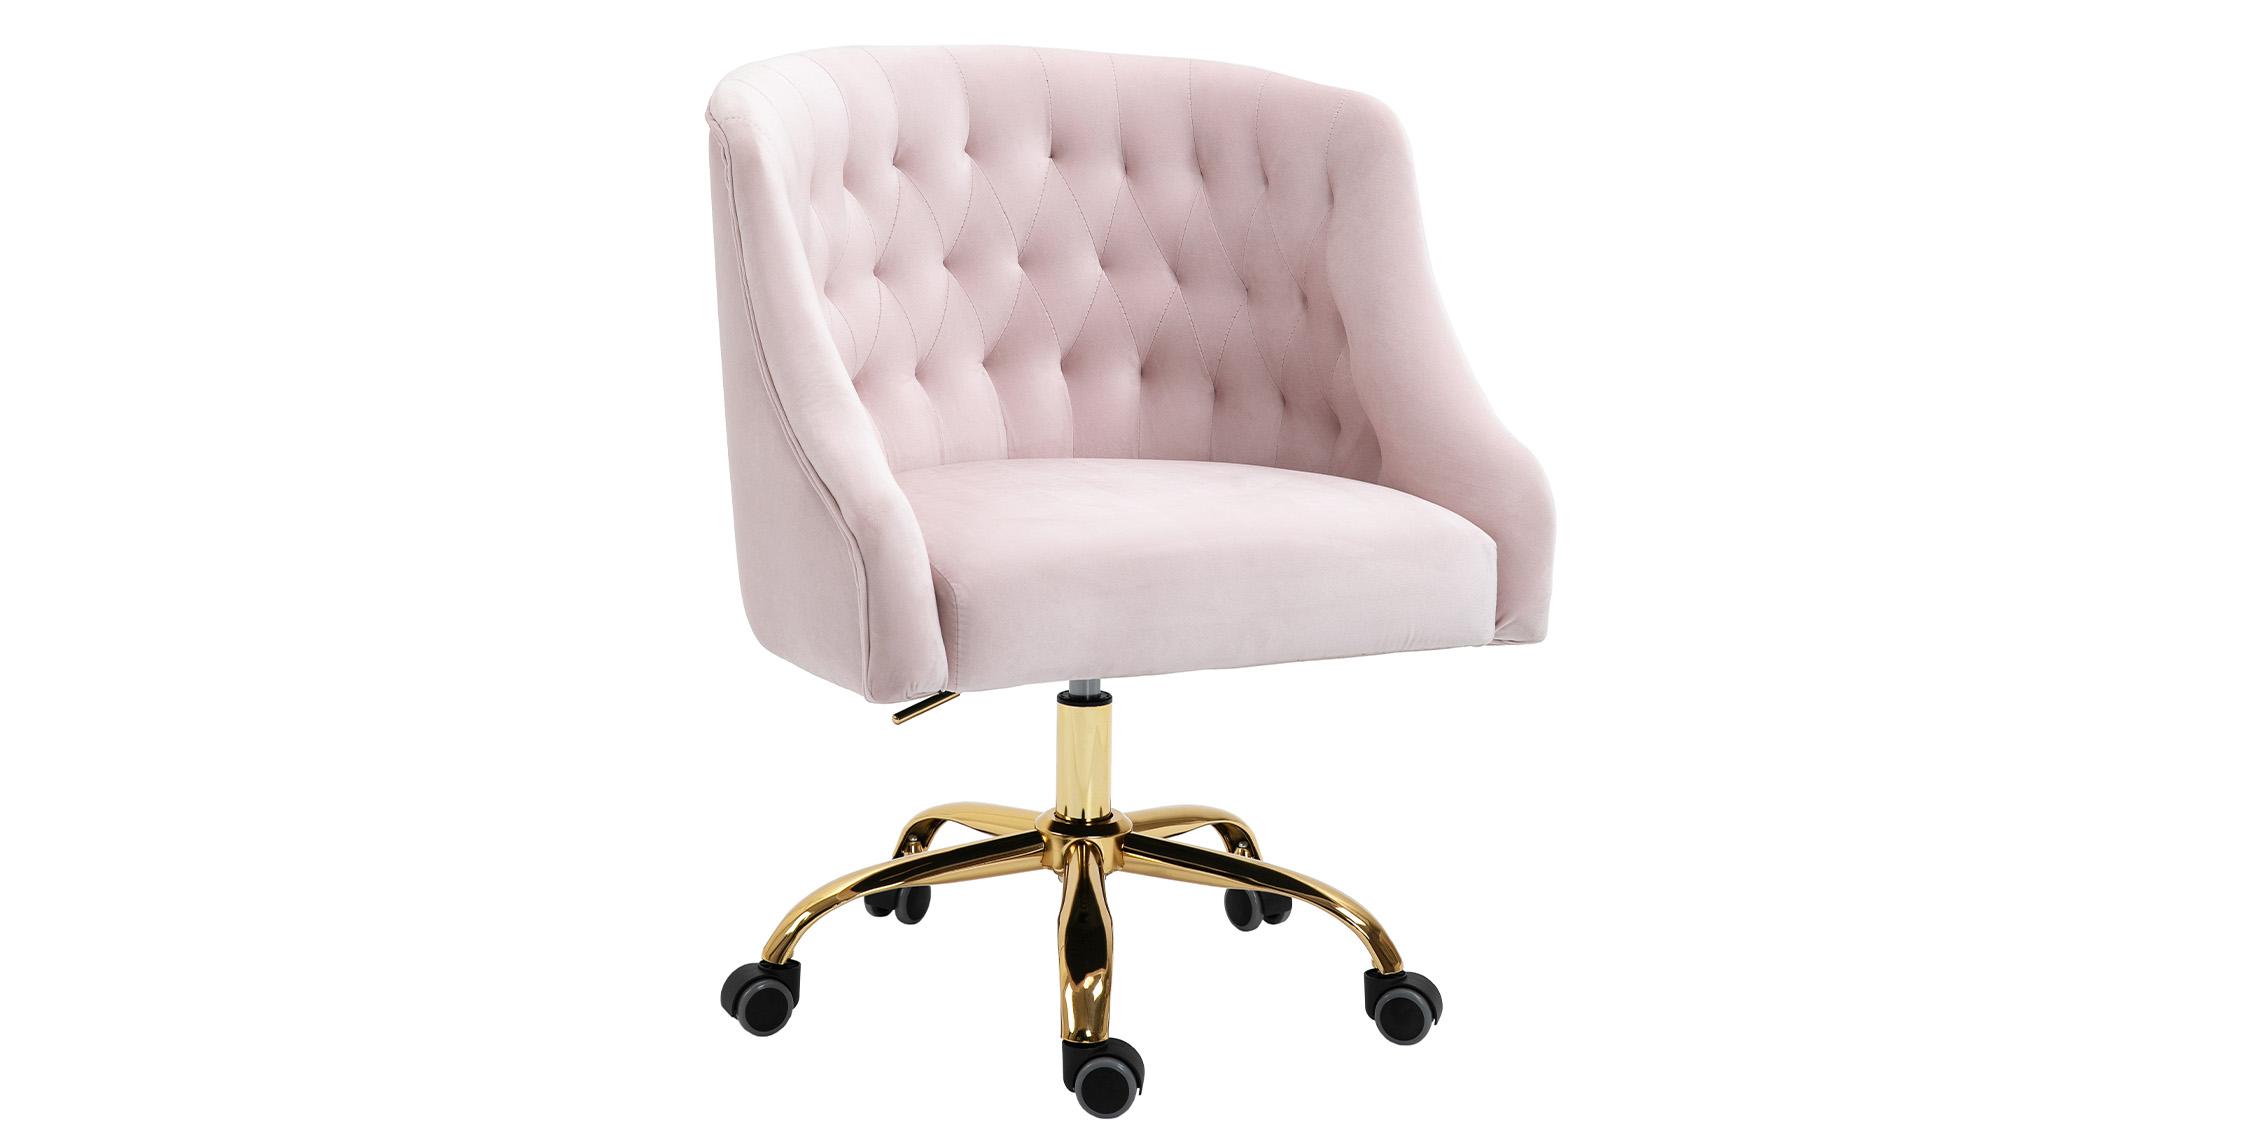 Contemporary, Modern Office Chair ARDEN 161Pink 161Pink in Pink Fabric